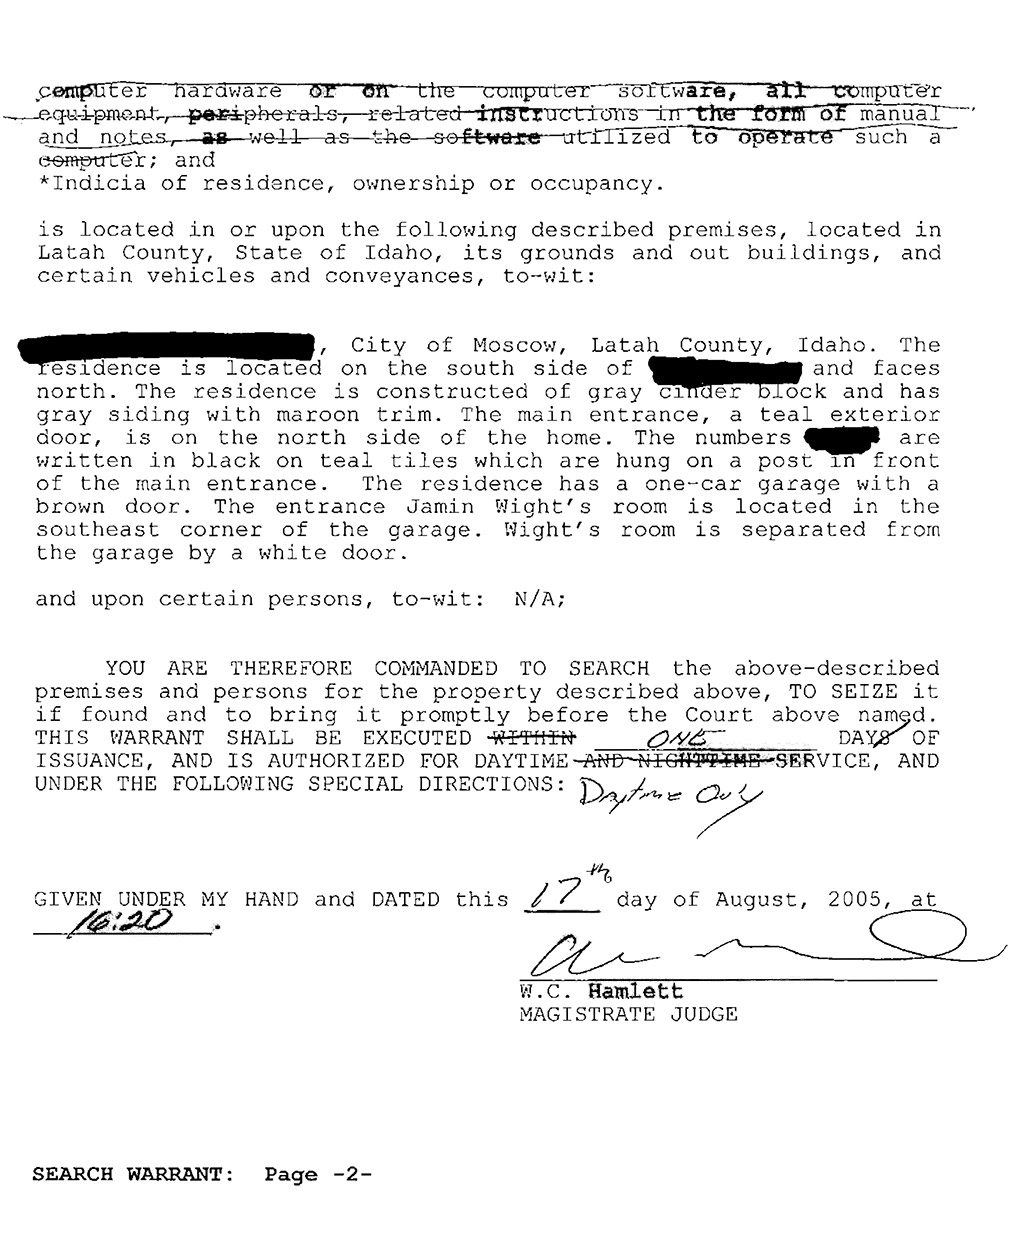 Jamin Wight Search Warrant page 2